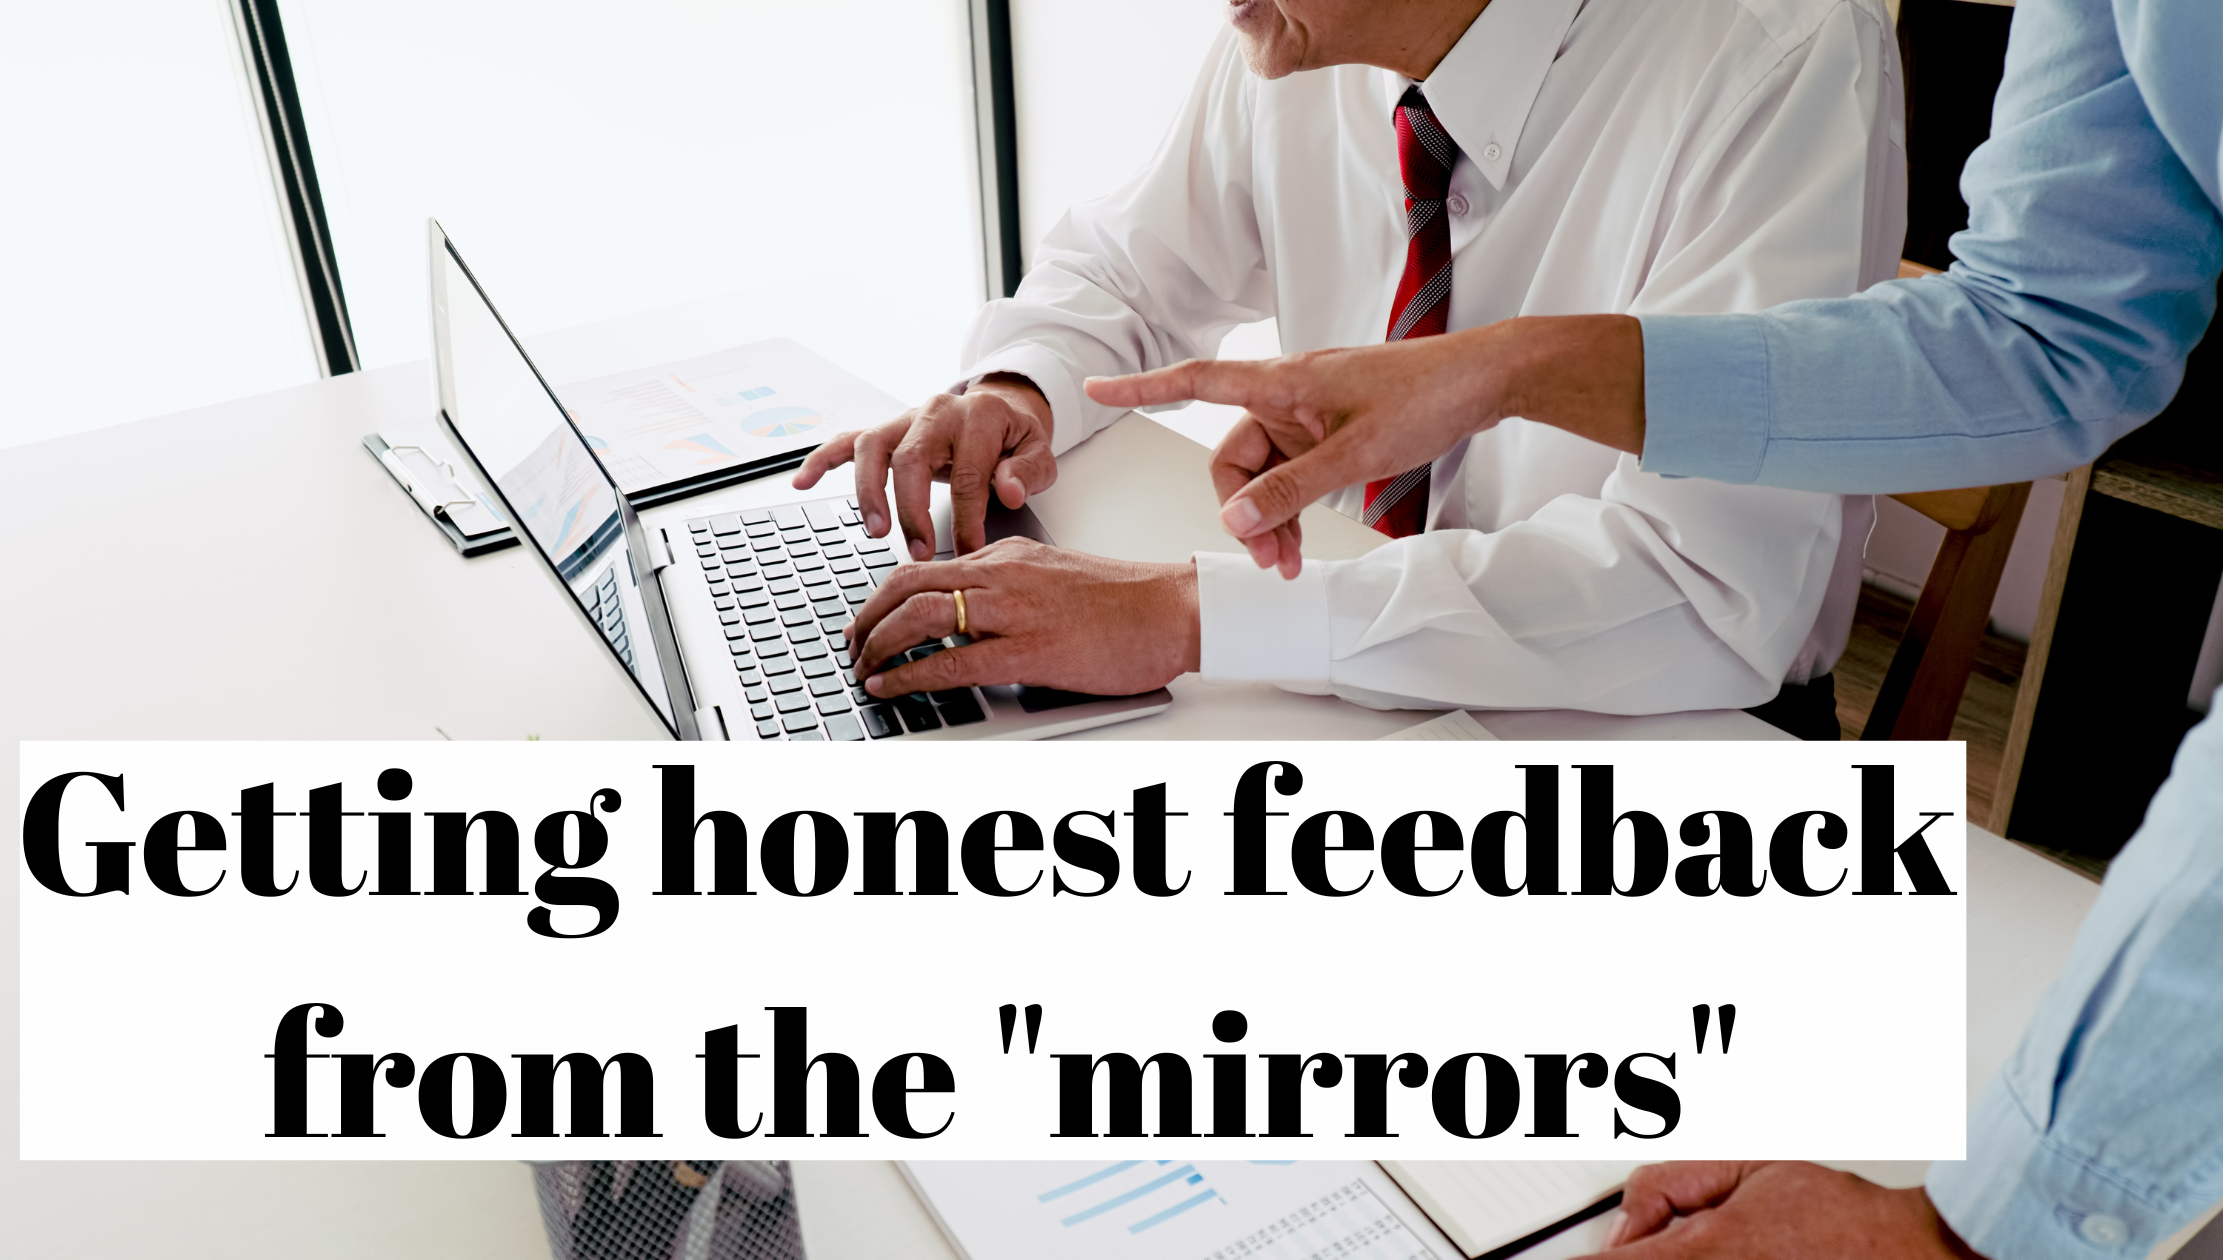 Getting honest feedback from the mirrors